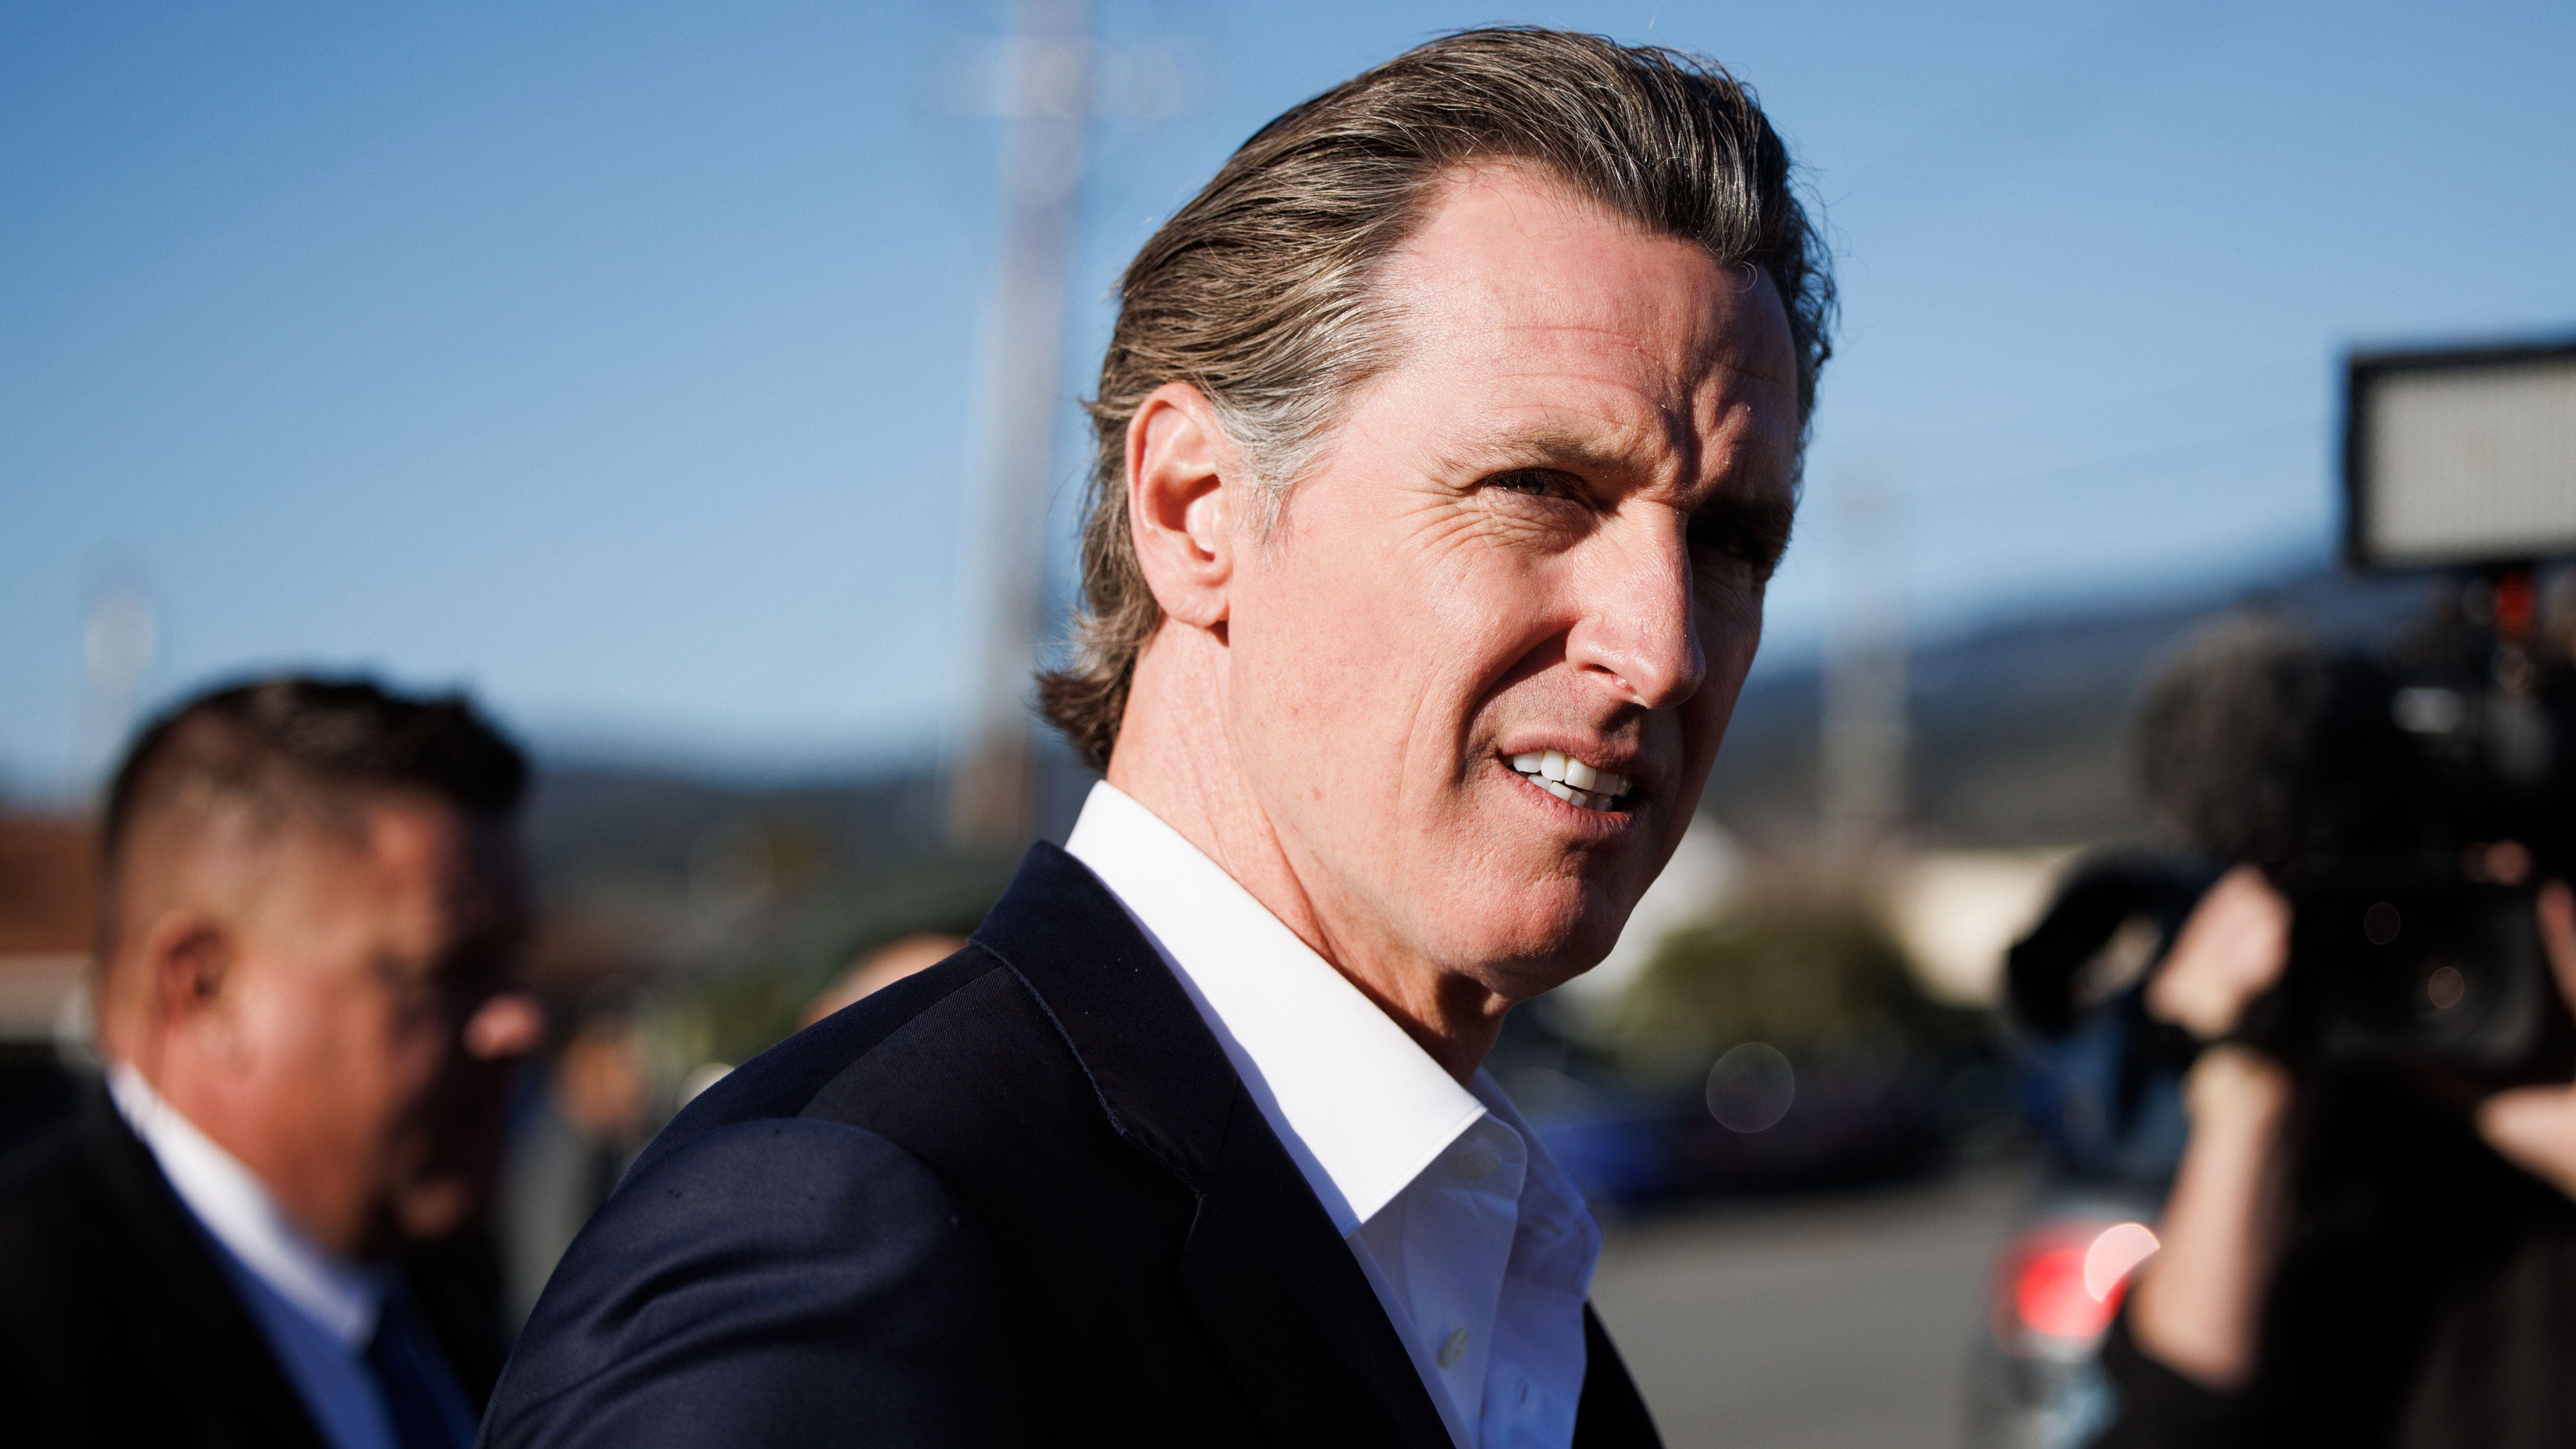 Former chief of staff to Gavin Newsom siding with Walgreens in abortion pill fight amid rising tensions